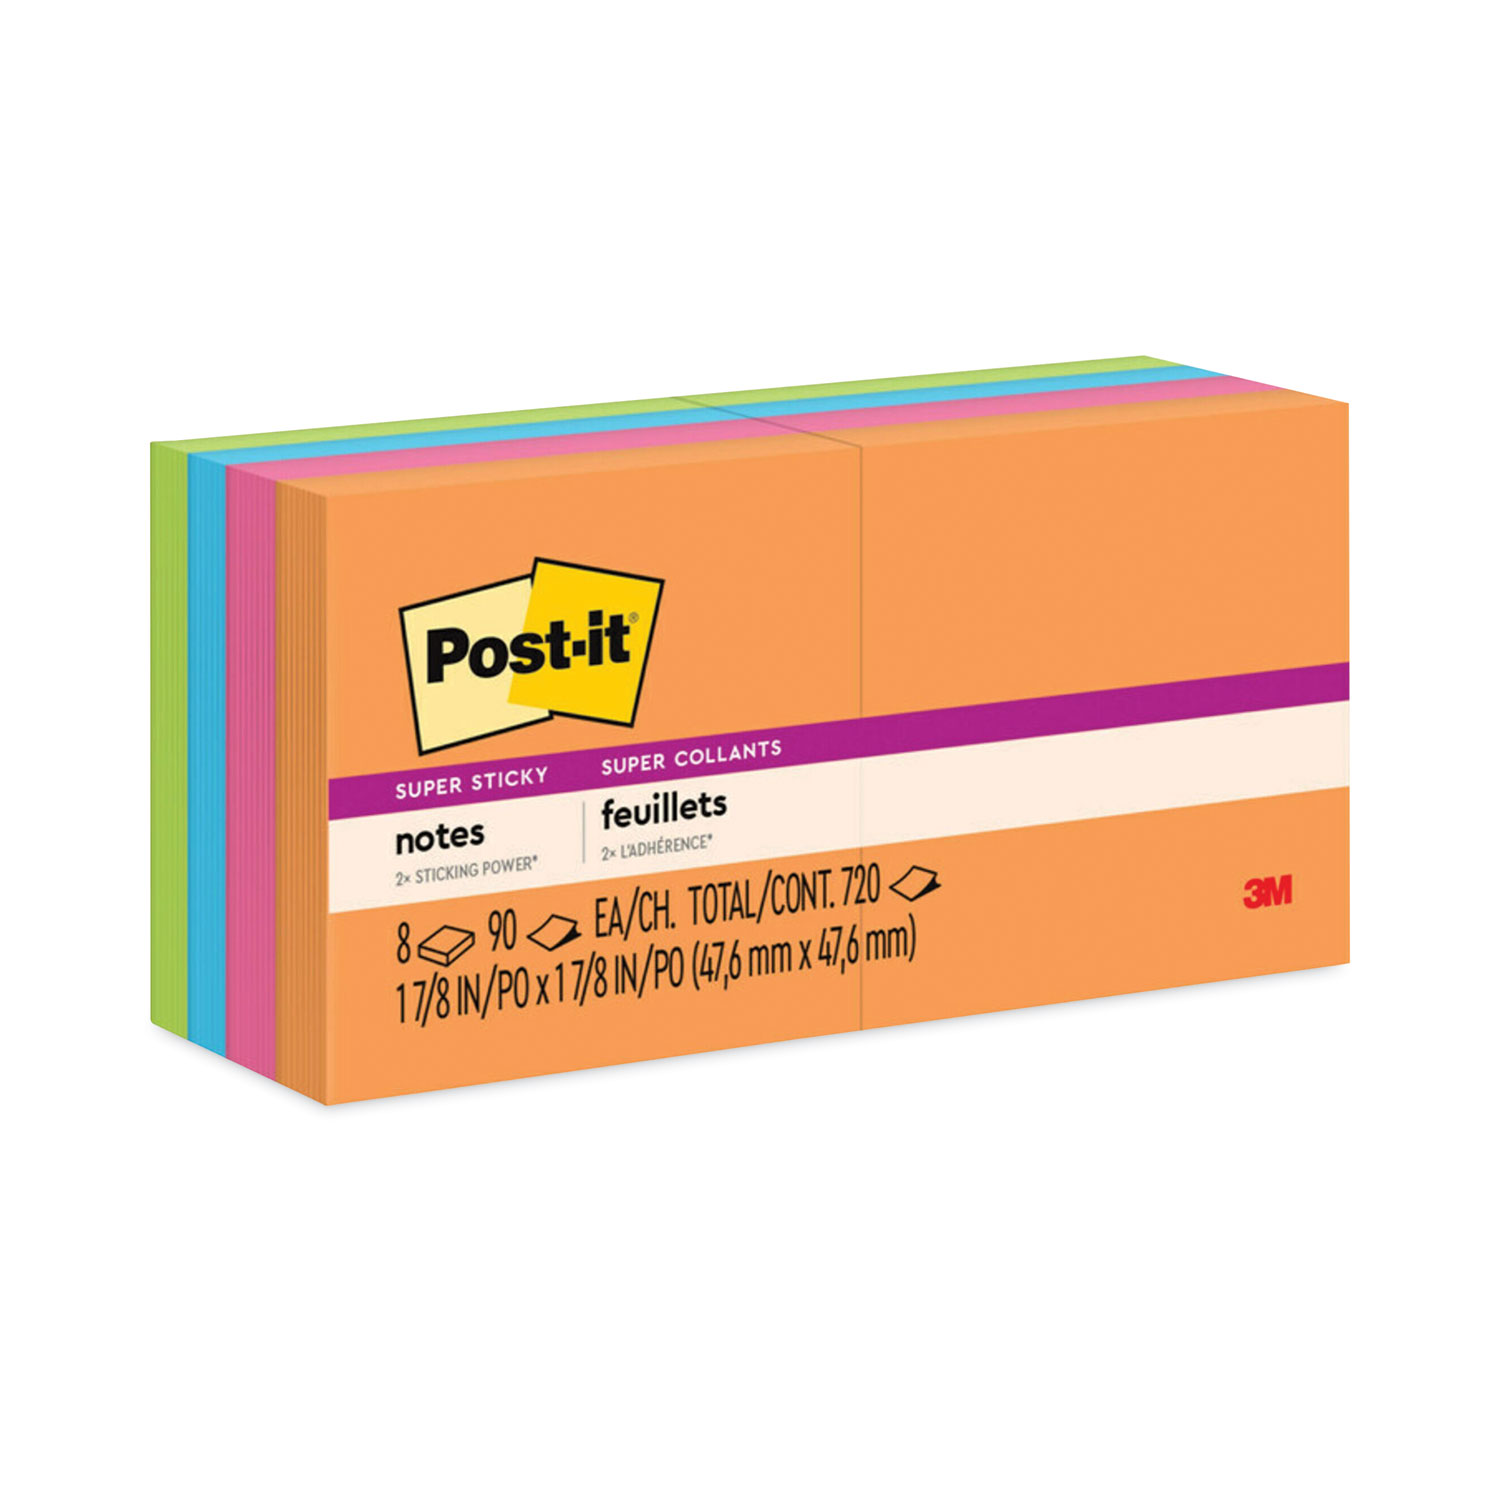 Mini Neon Sticky Notes, 2x2, 4 Pack